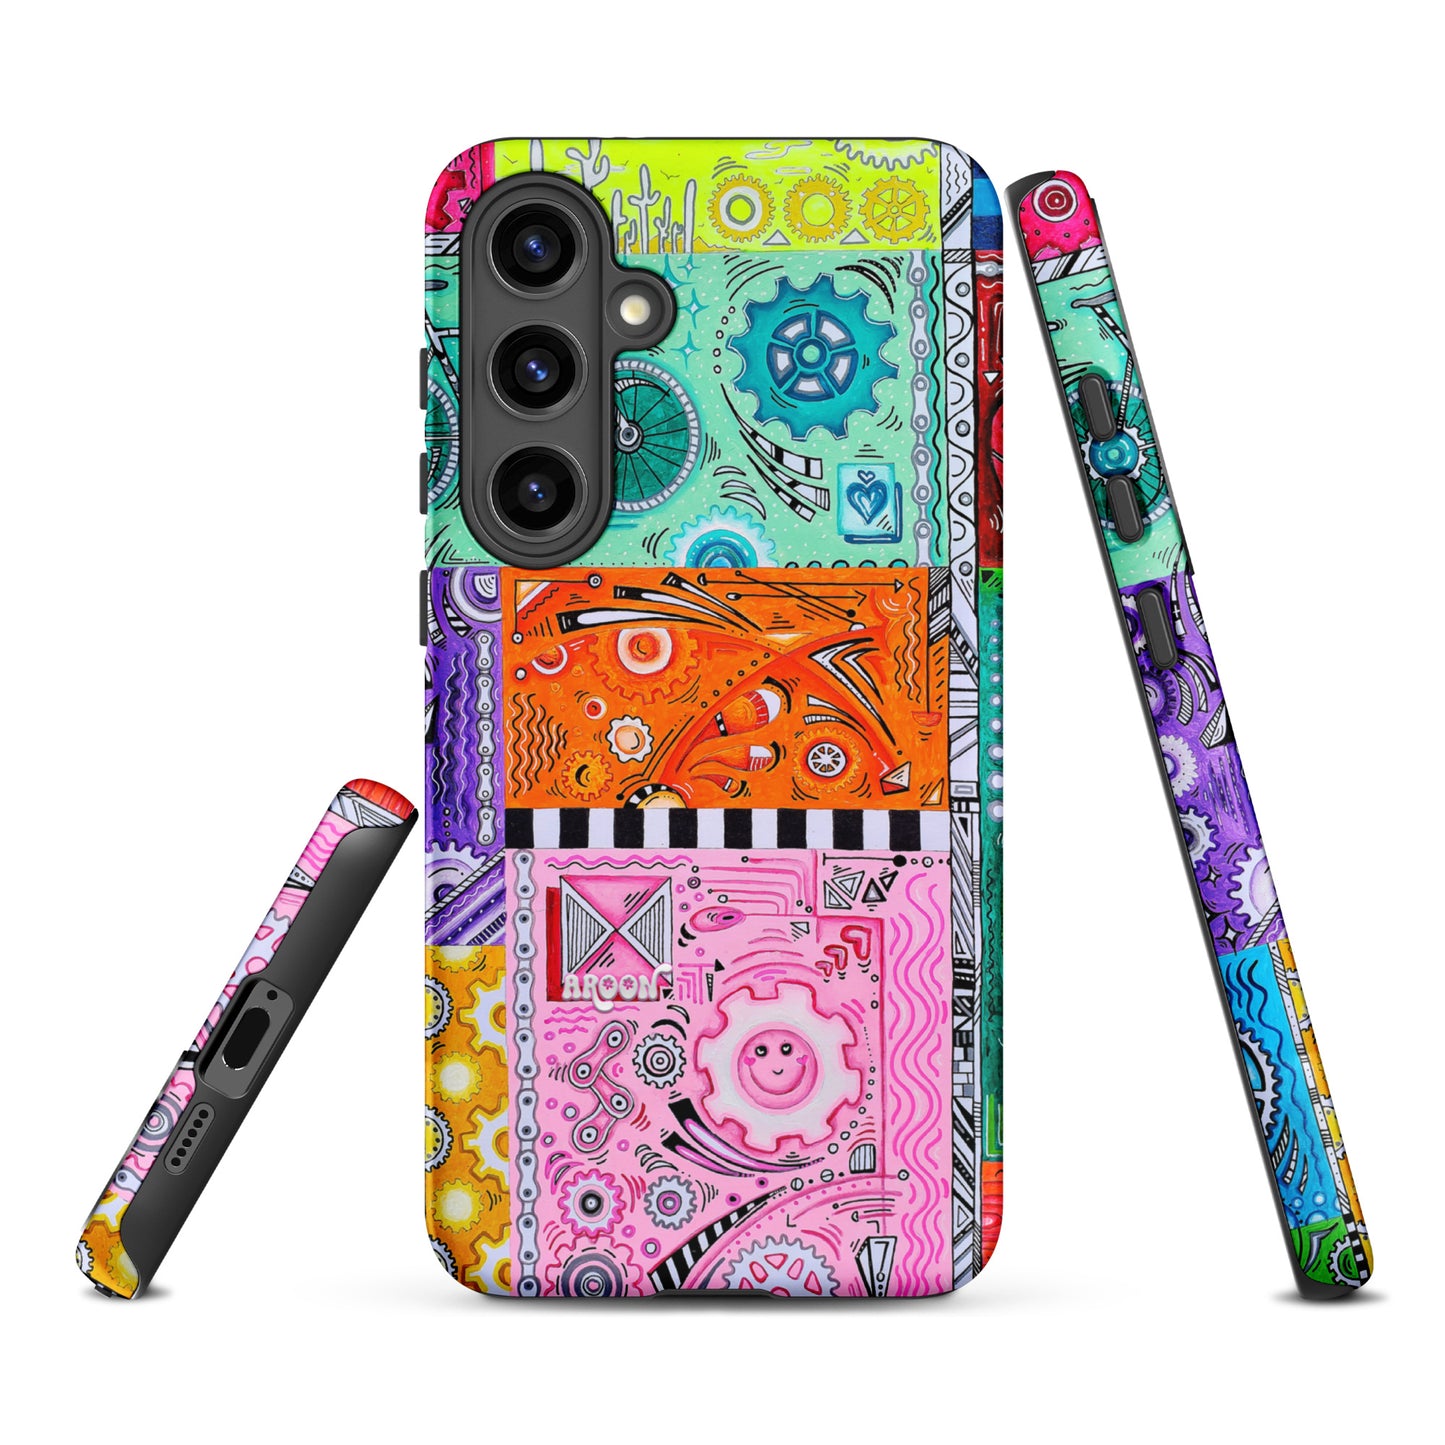 "Patchwork" Cycling Gears Doodle Design ~ Tough case for Samsung®